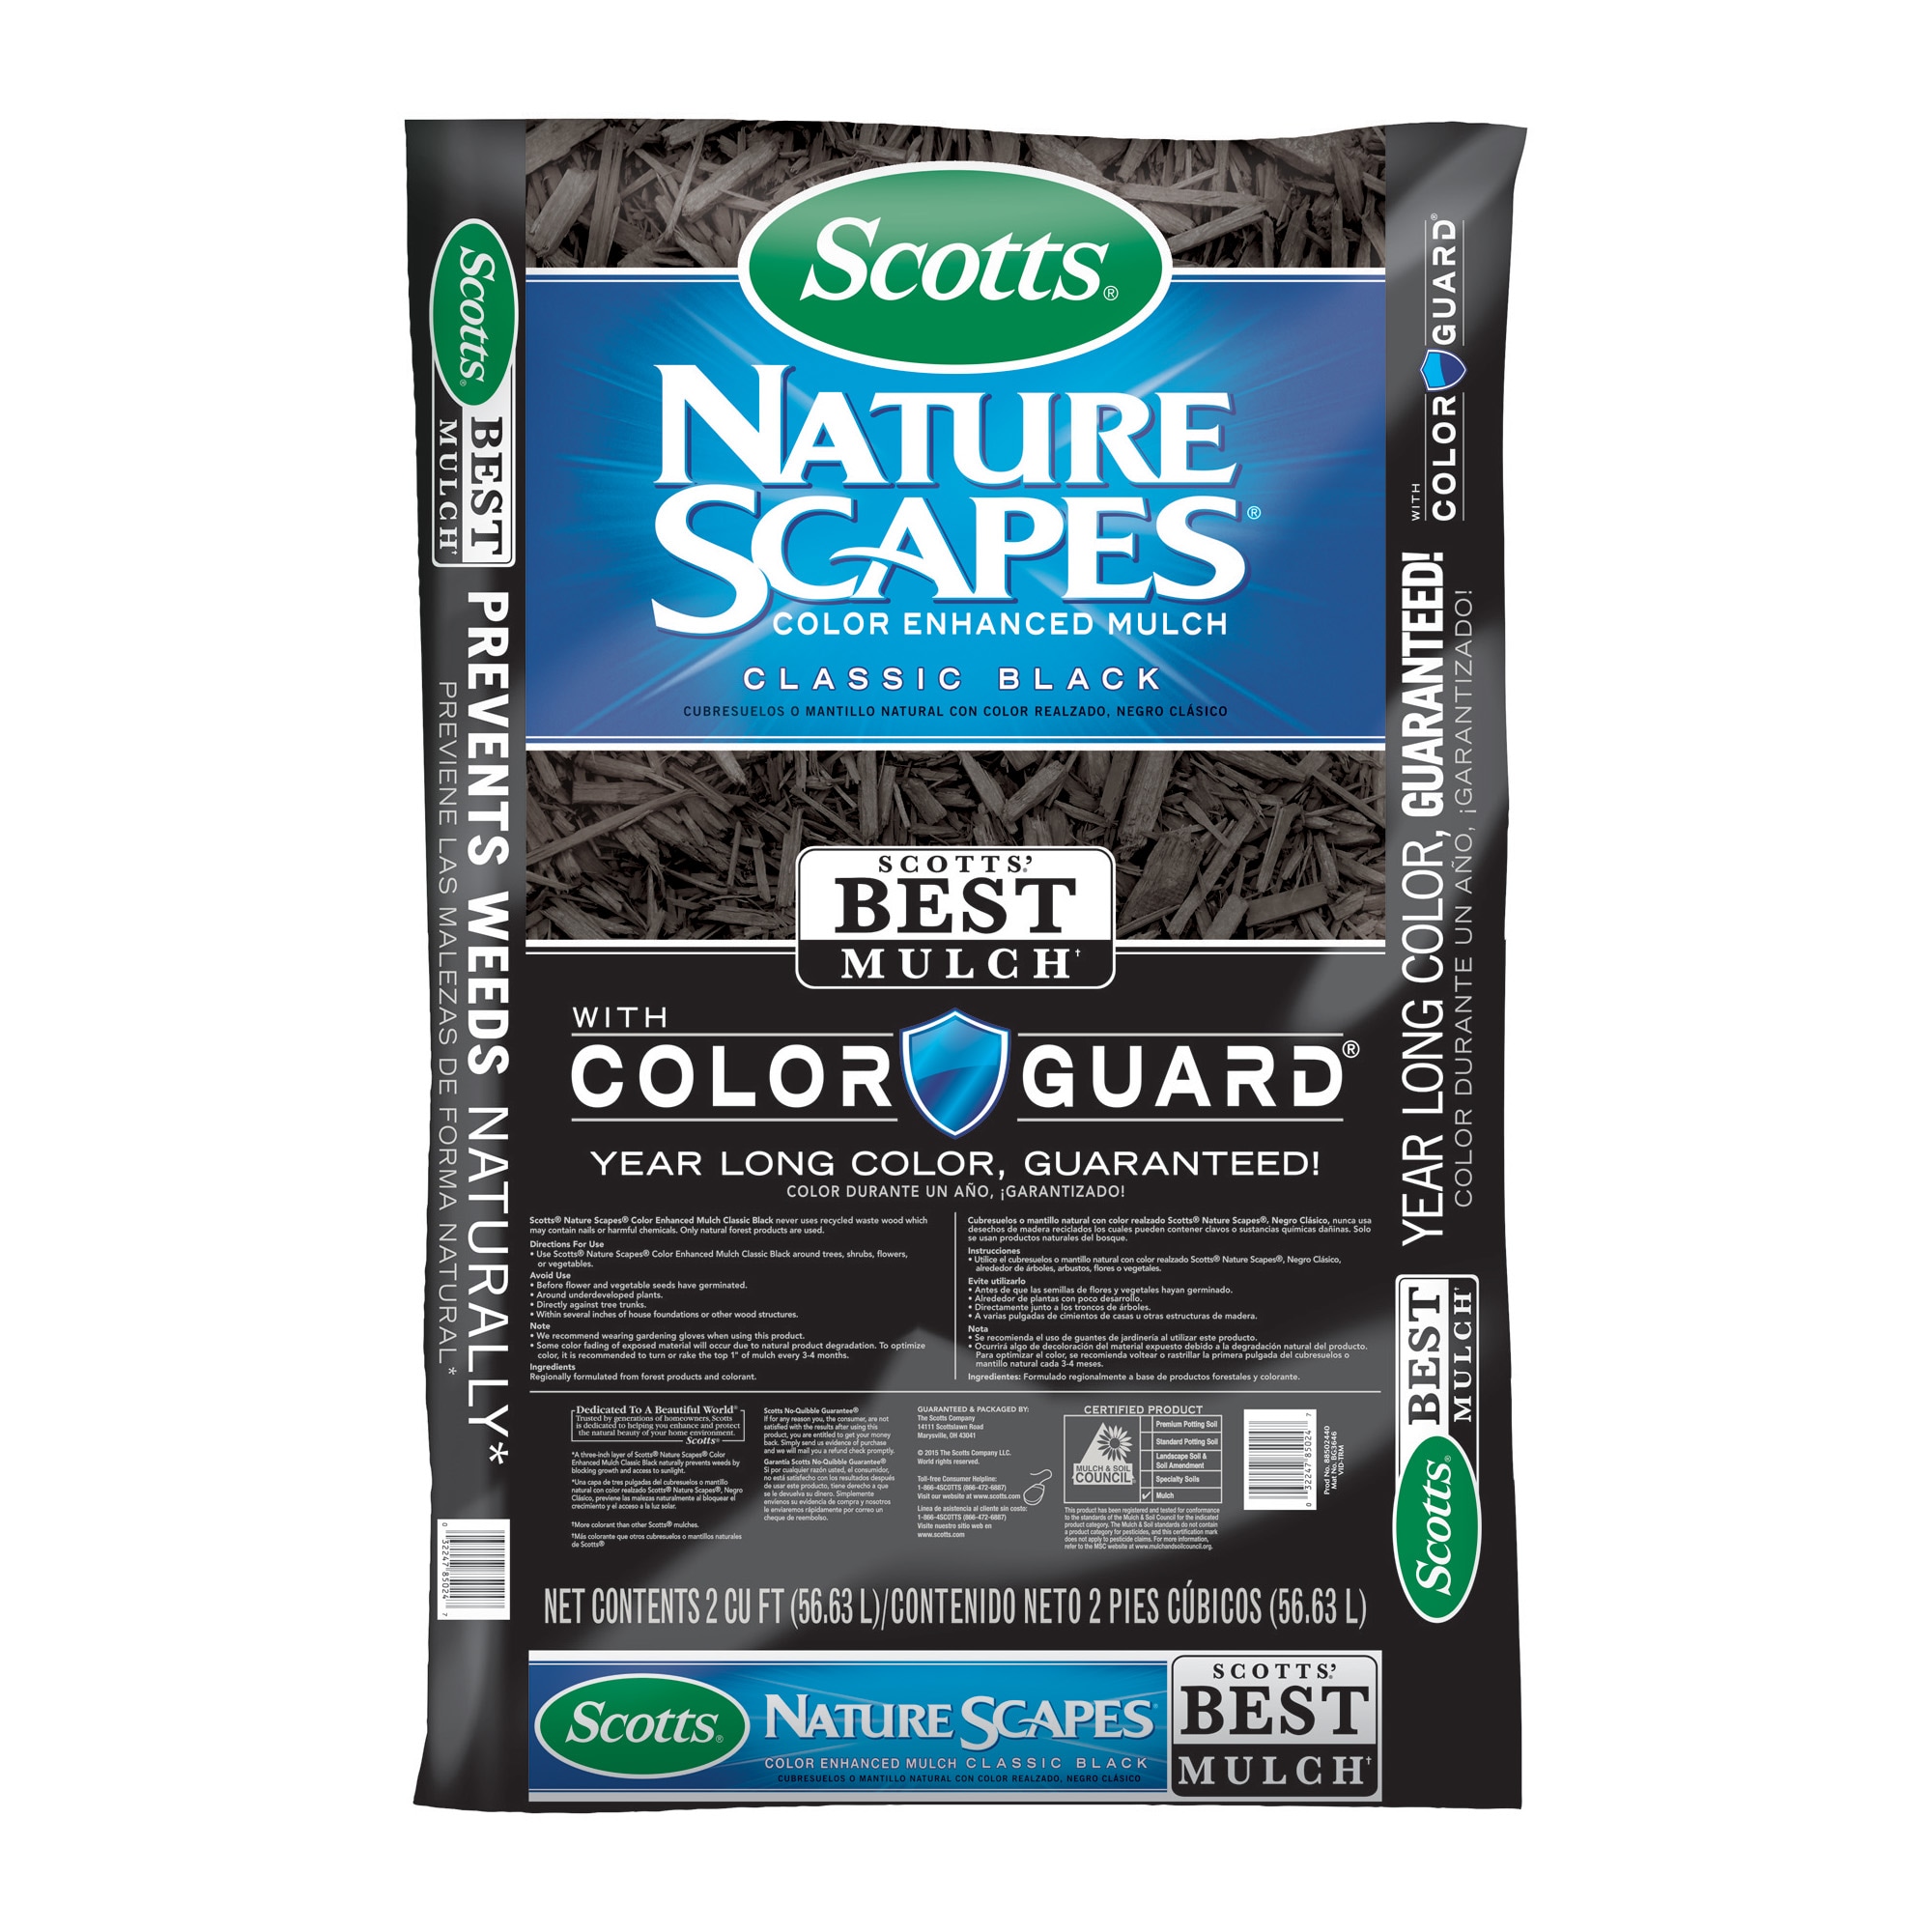 Image of Scotts Nature Scapes Natural Black Mulch